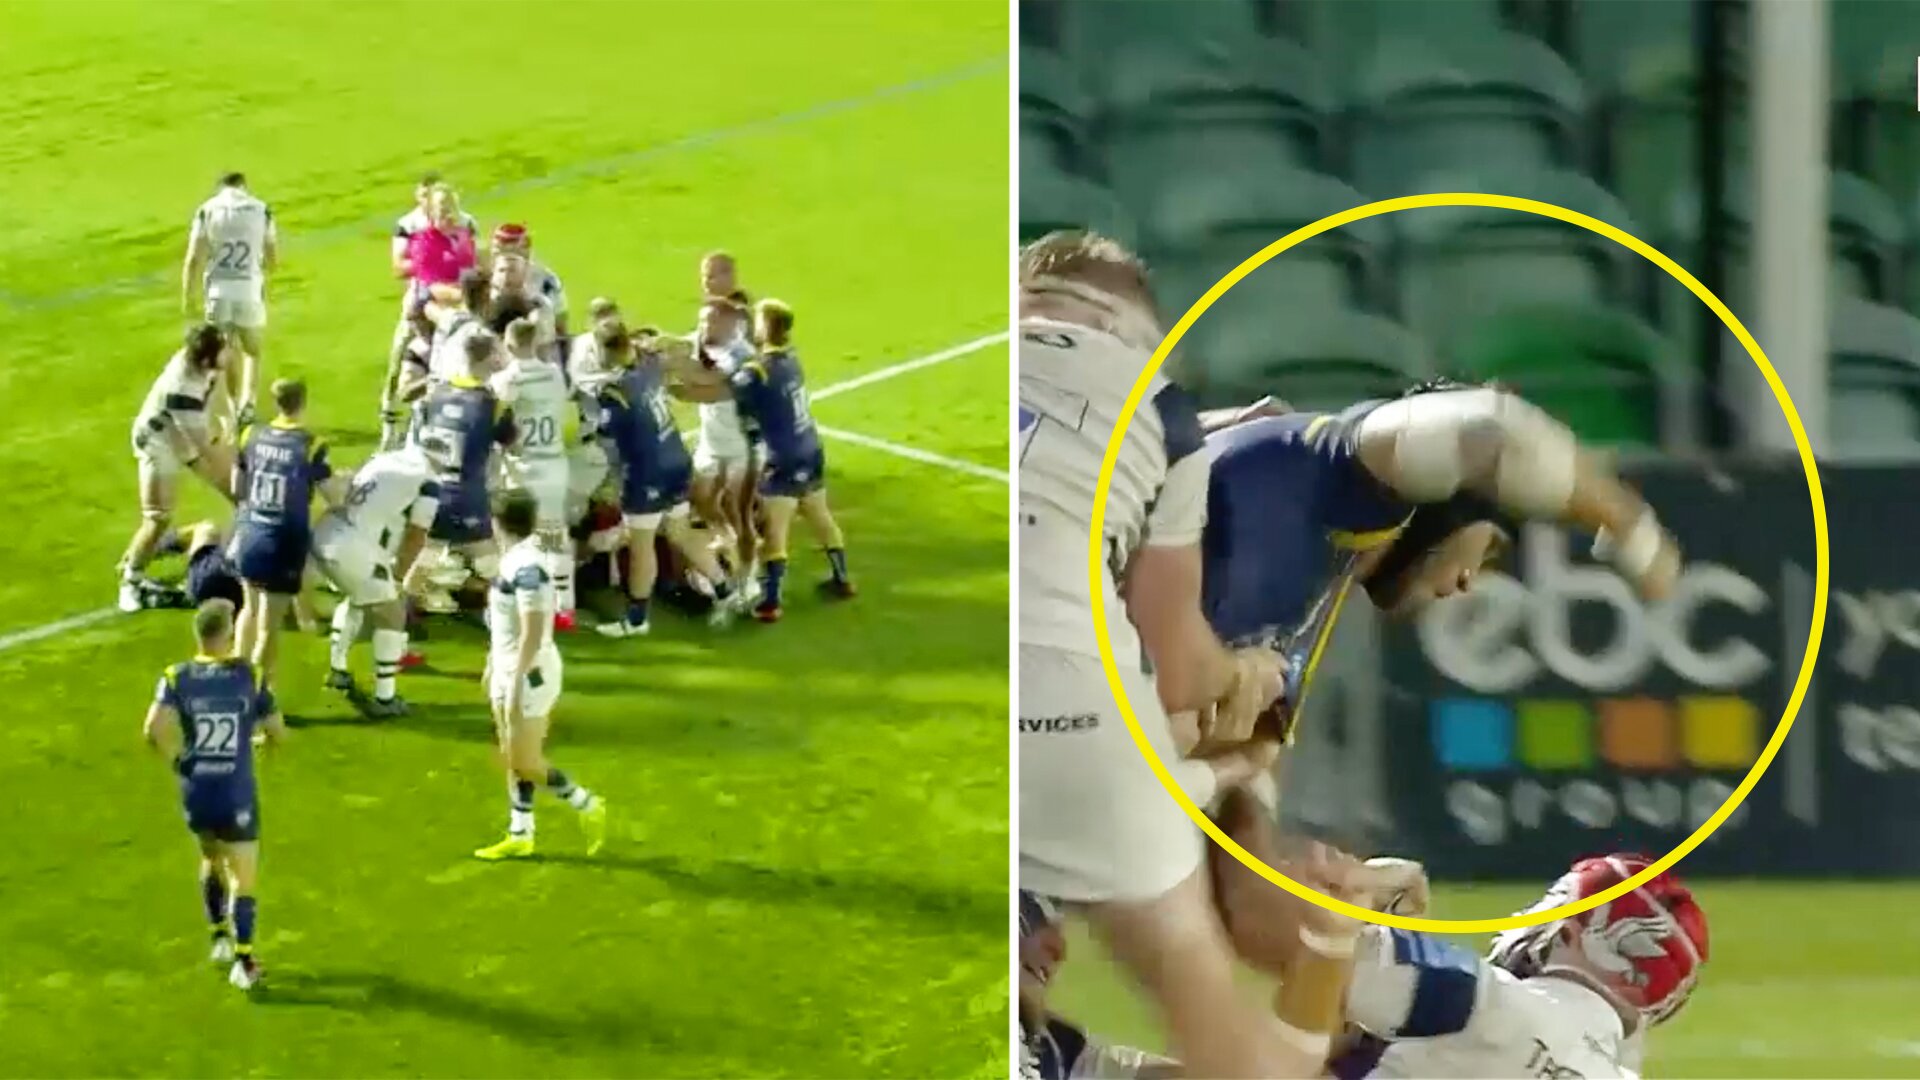 Gallagher Premiership match descends into chaos as ferocious mass brawl breaks out